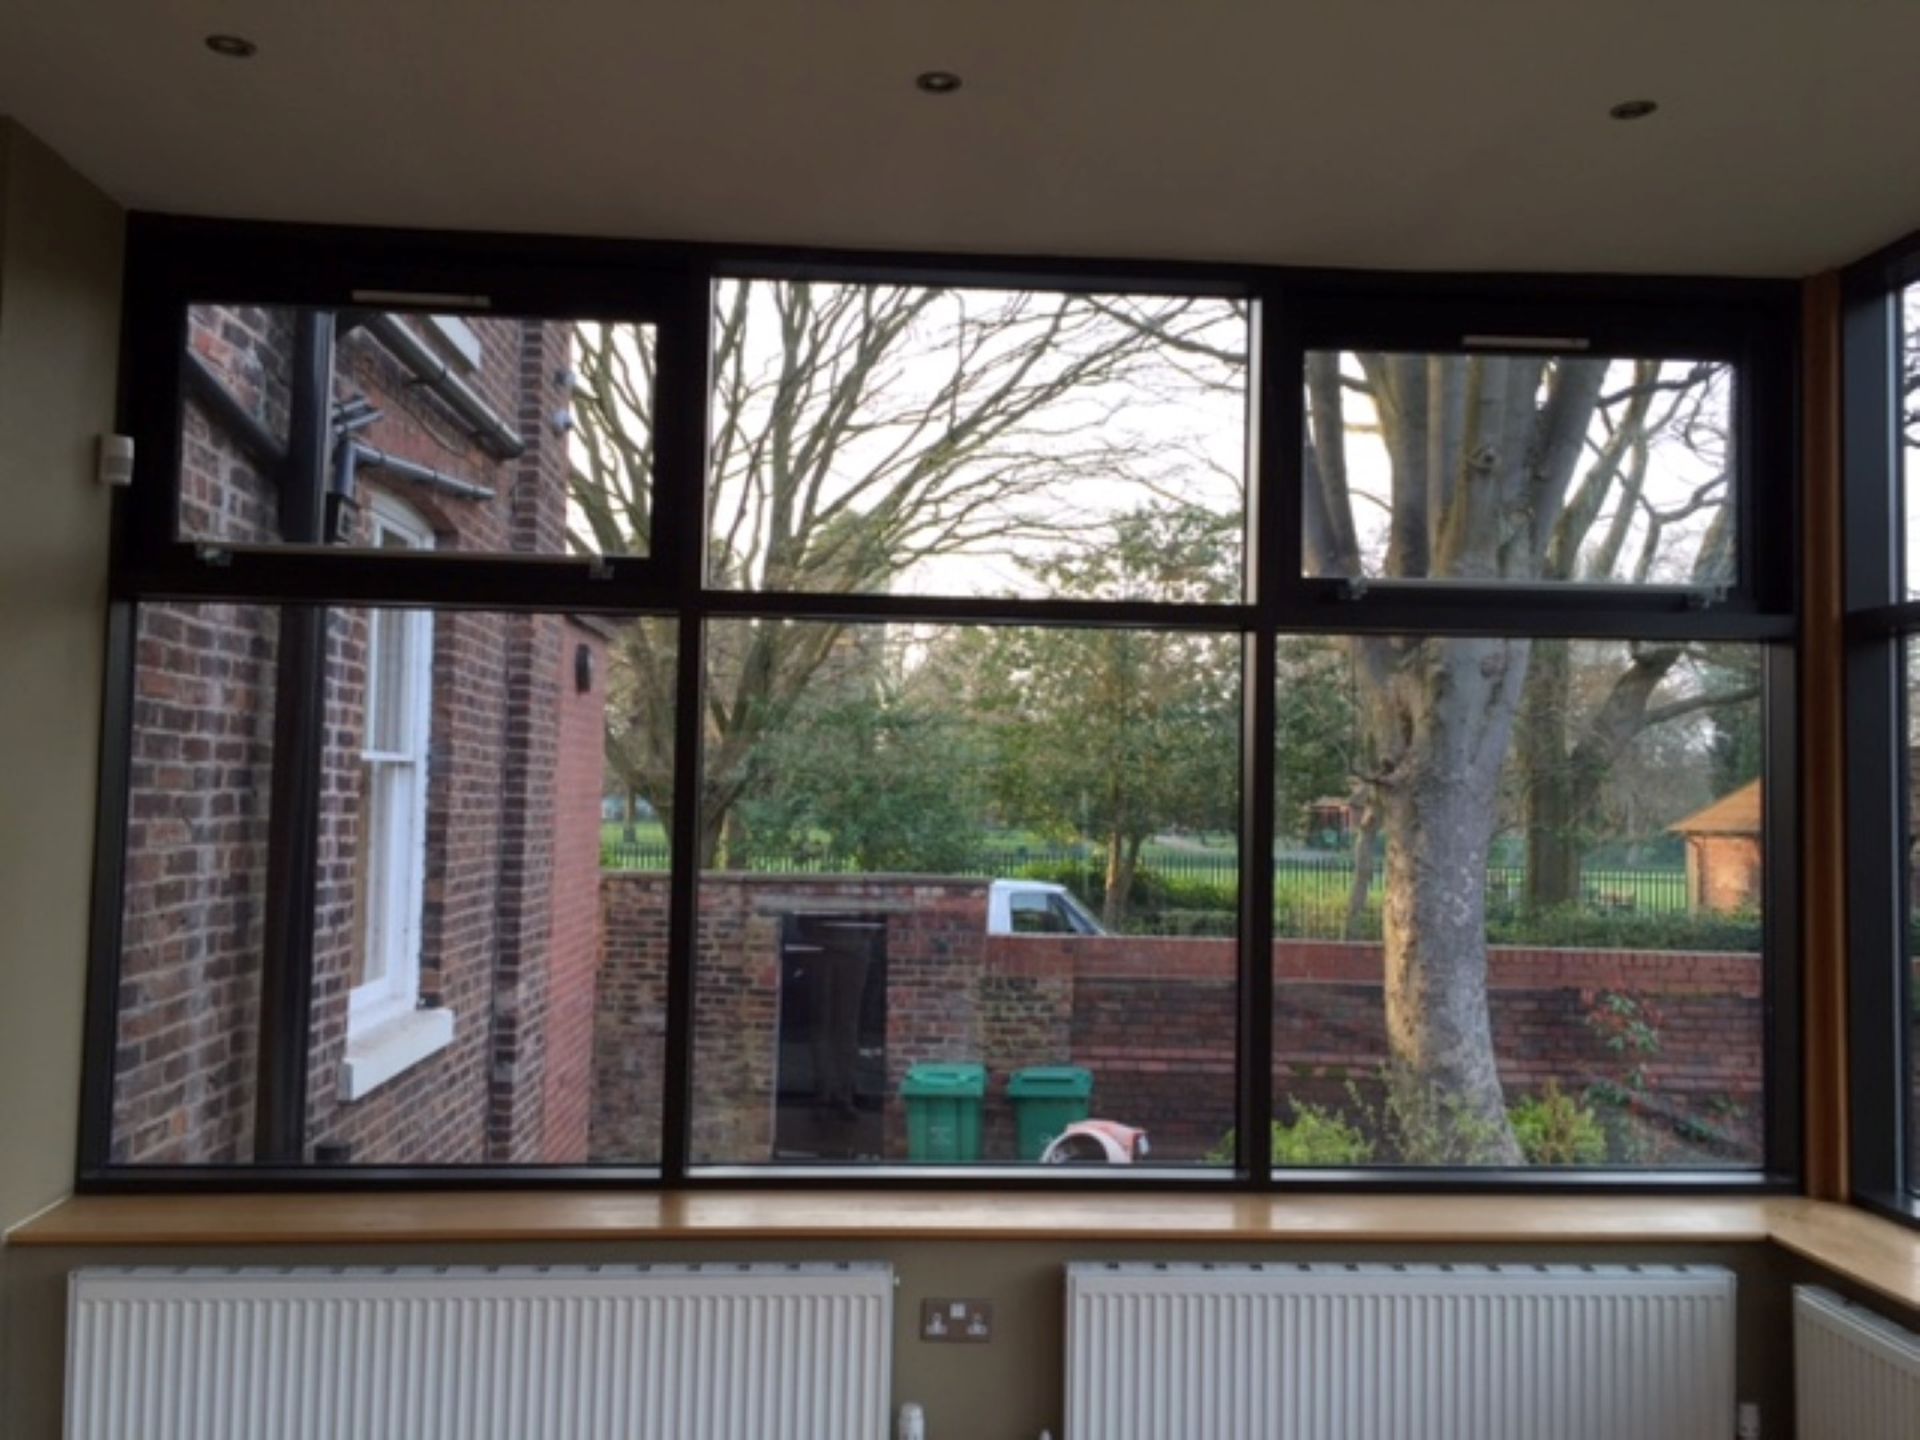 1 x Aluminium Framed Conservatory With Double Glazed Glass Panels - See Listing Details For - Image 3 of 3